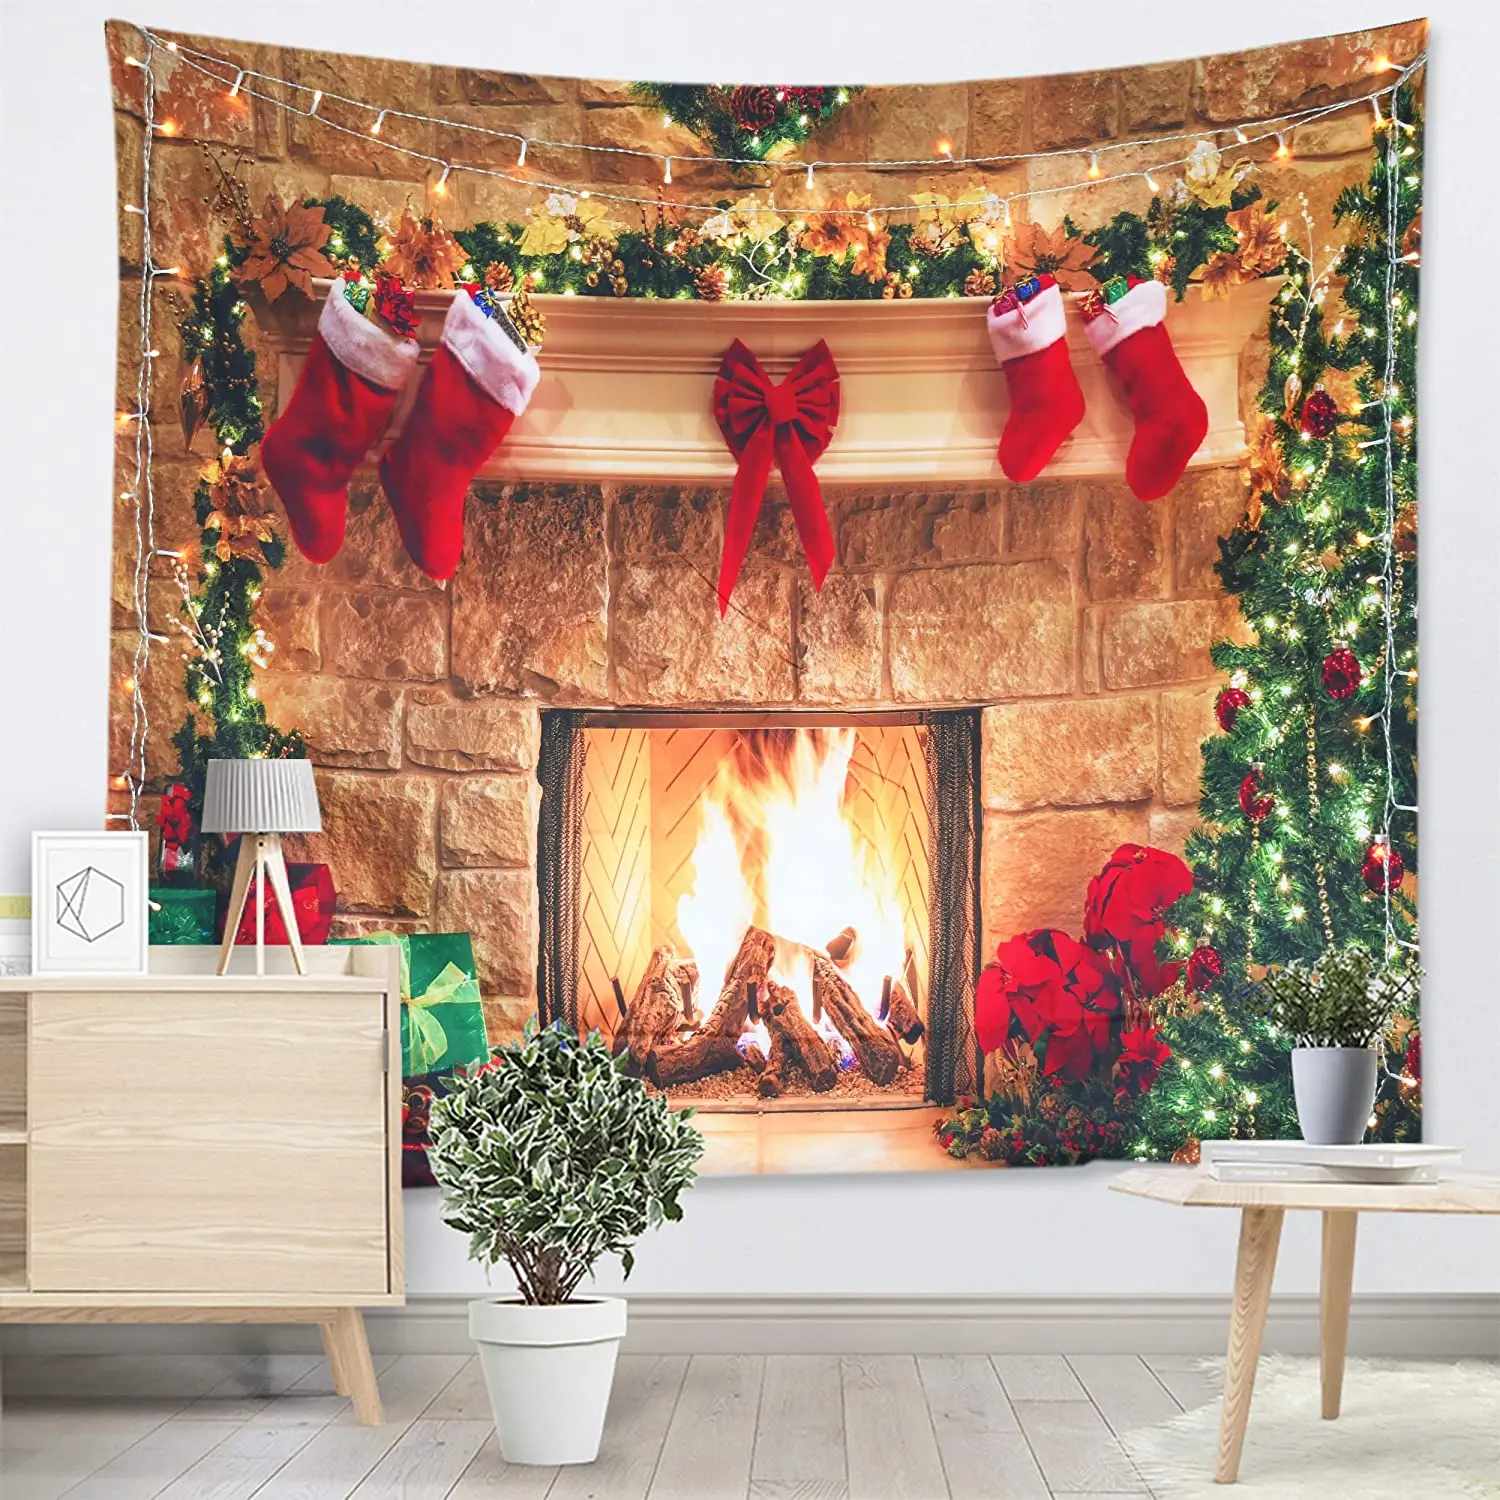 

Christmas Tapestry Wall Hanging Fireplace Xmas Tree Stockings Gifts Wall Tapestry for Party Living Room Bedroom Dorm Home Decor